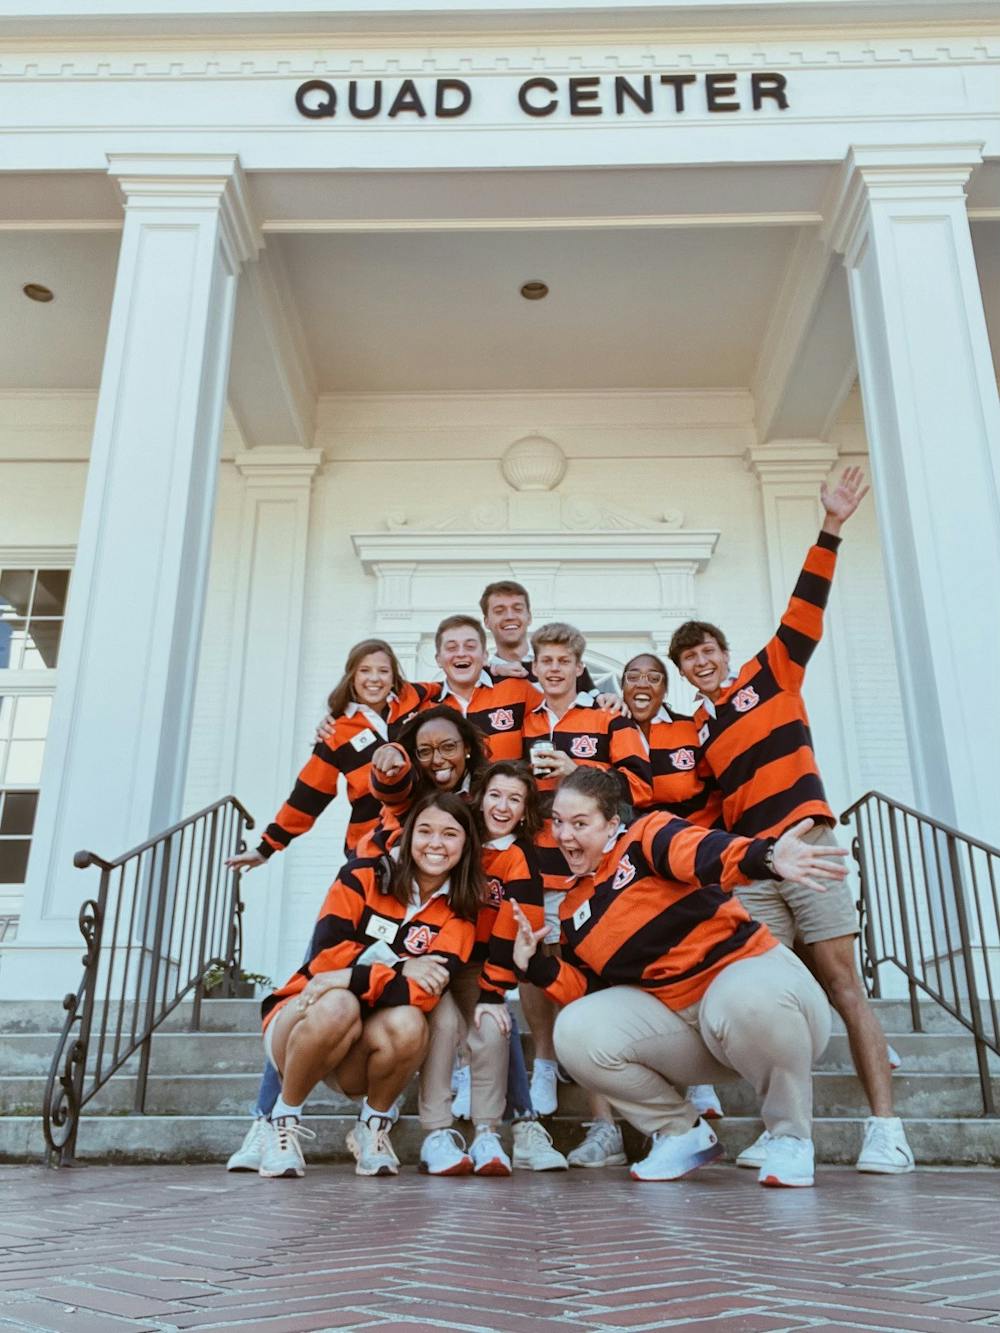 <p>Student recruiters in front of the Quad Center. From top row to bottom row, from left to right: Olivia Clement, Dalton Odom, Daniel Bobbit, Connor McCoy, Kai Jones, Asher Tatum, Elaine Shankute, Hope Johnson, Campbell Morgan and Alyssa Allen.&nbsp;</p>